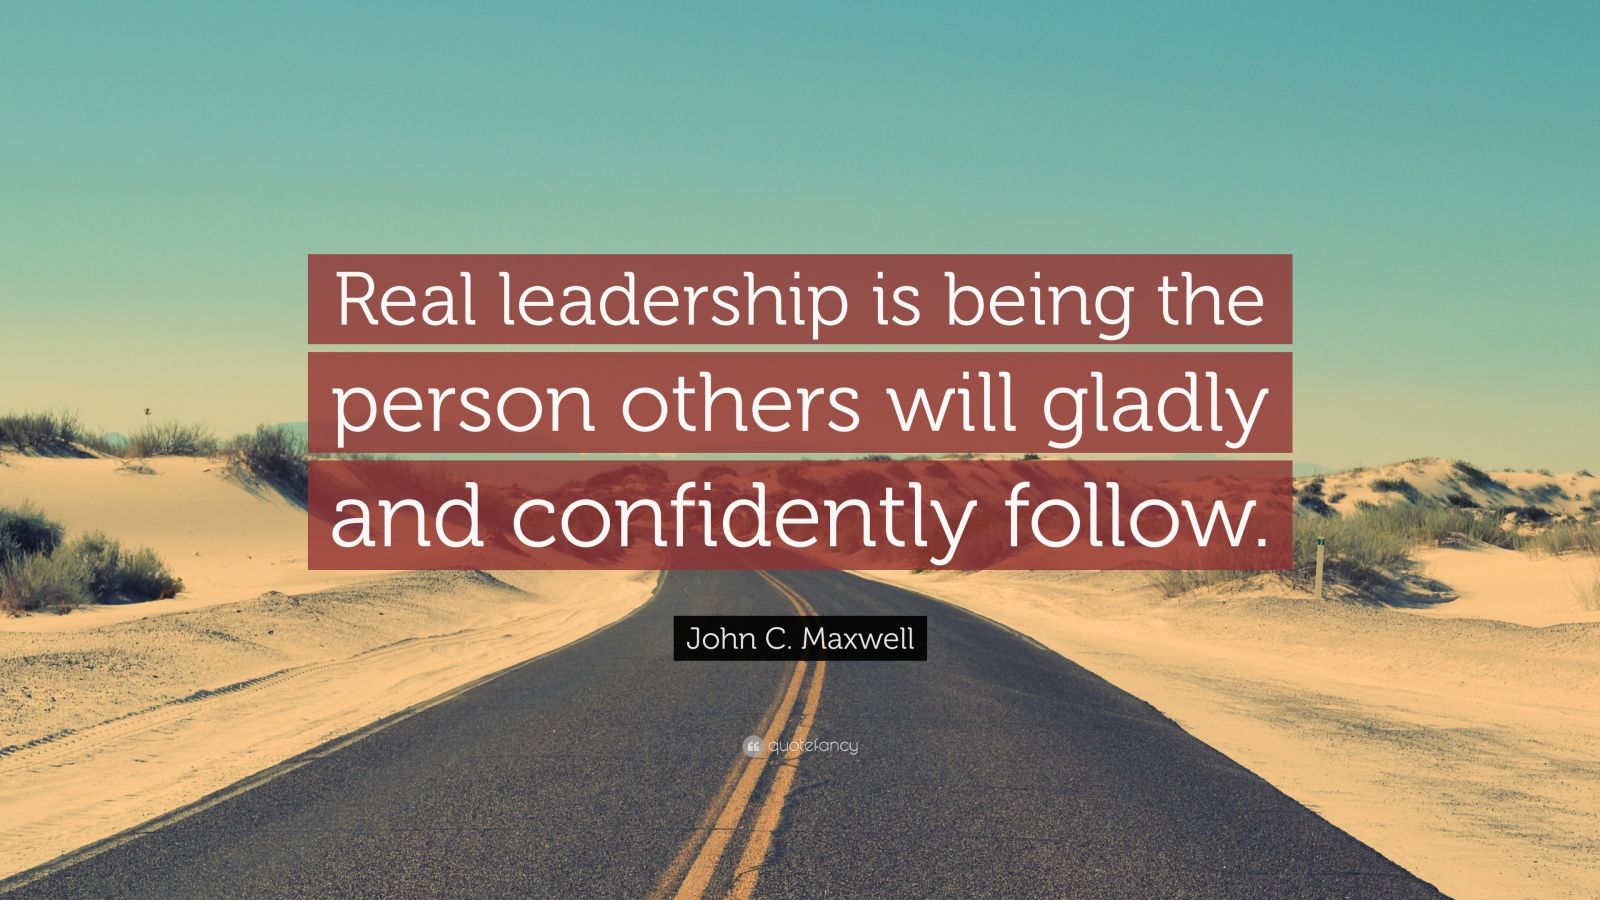 14213 John C Maxwell Quote Real leadership is being the person others